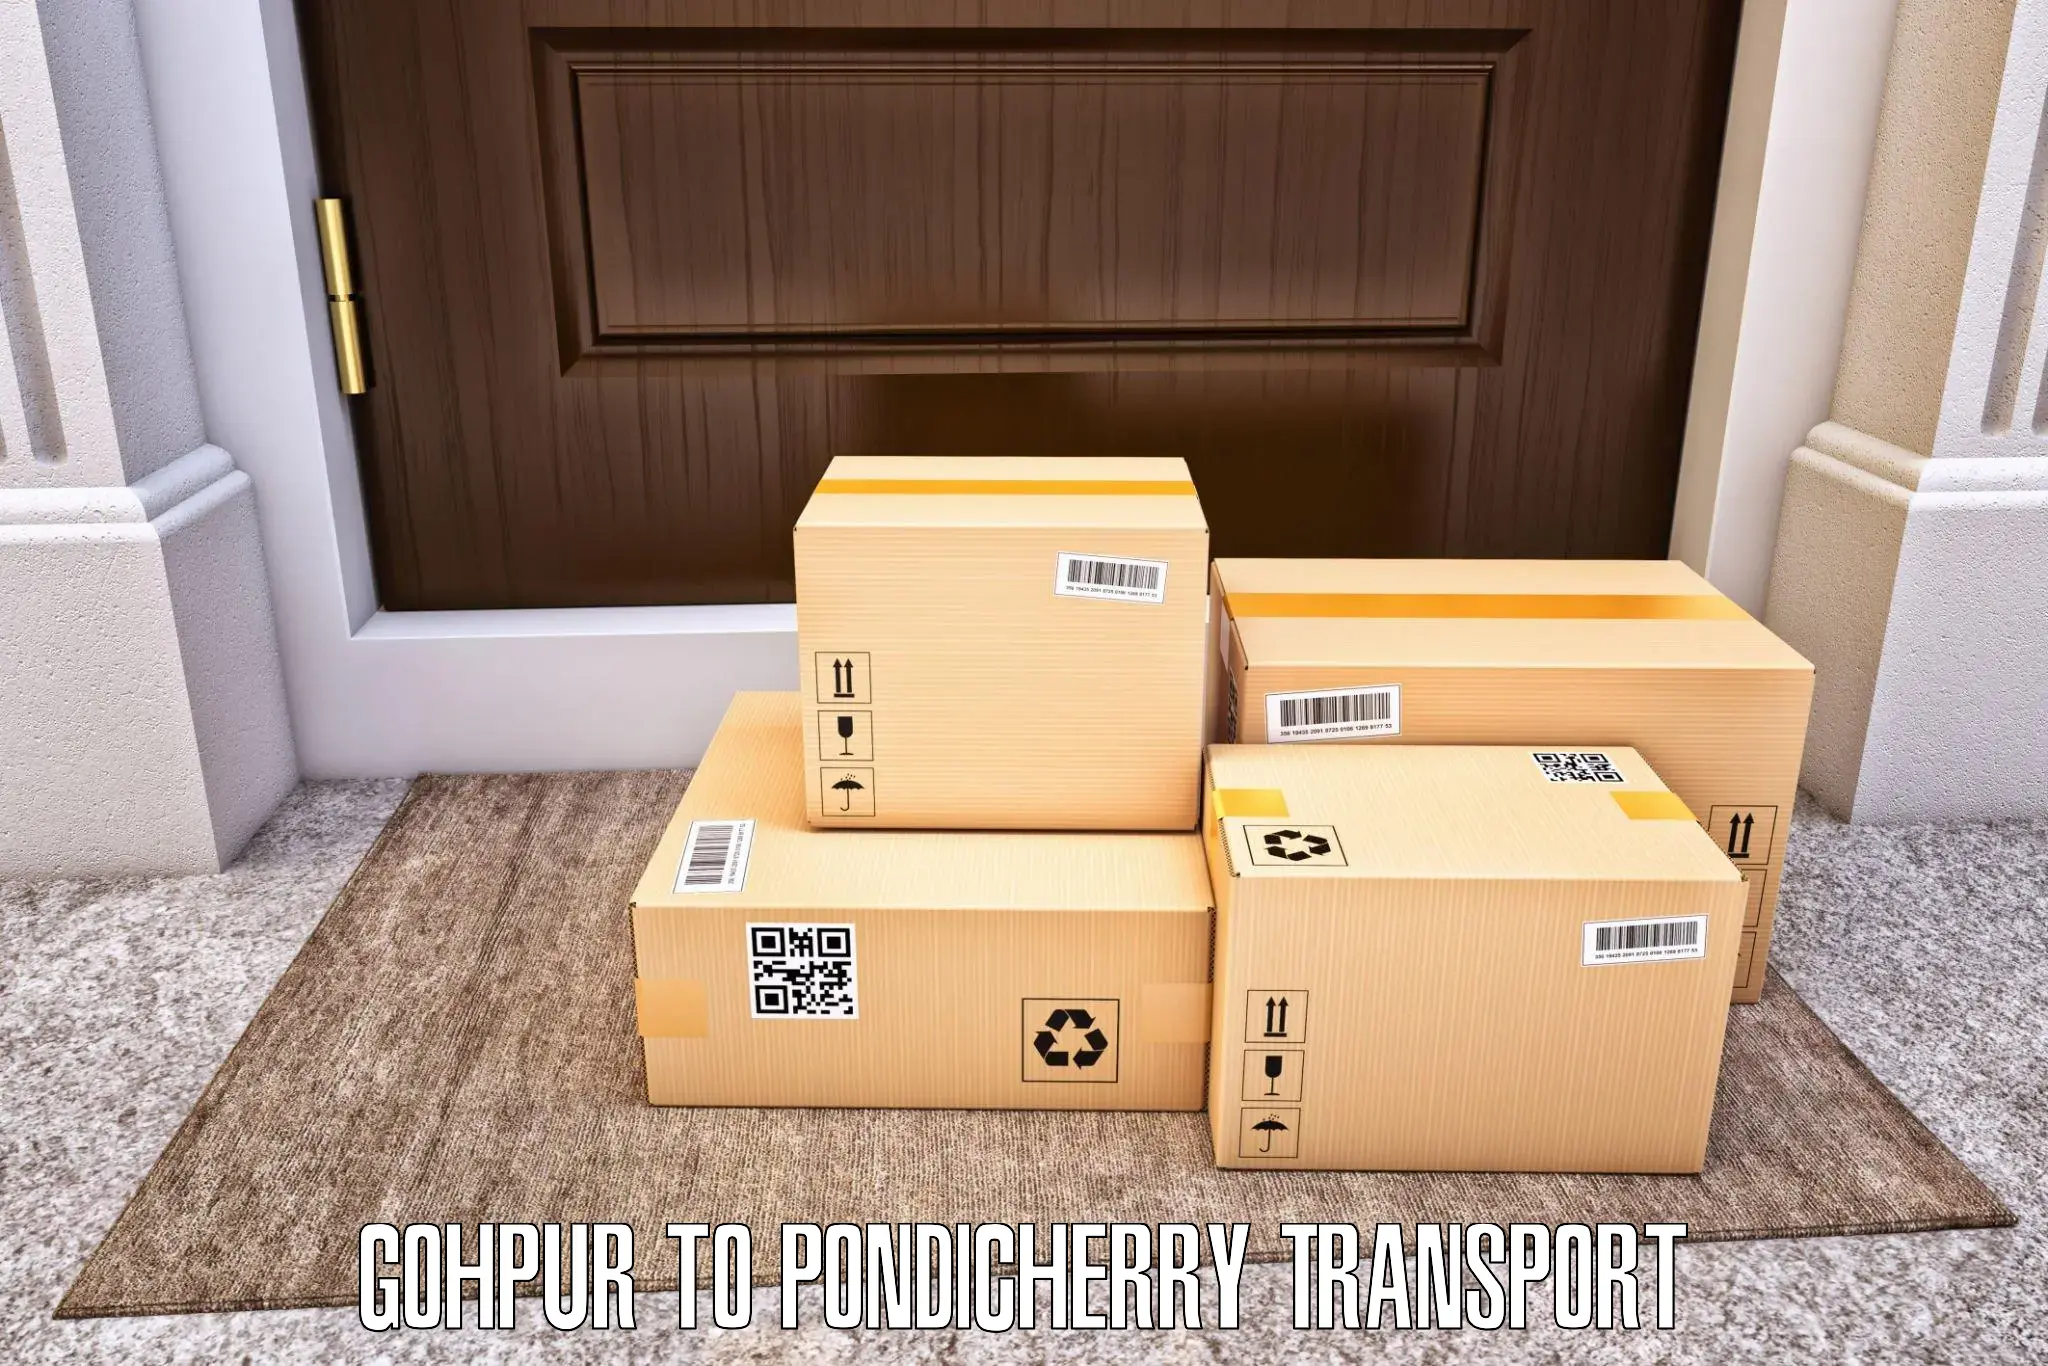 Container transport service in Gohpur to Pondicherry University